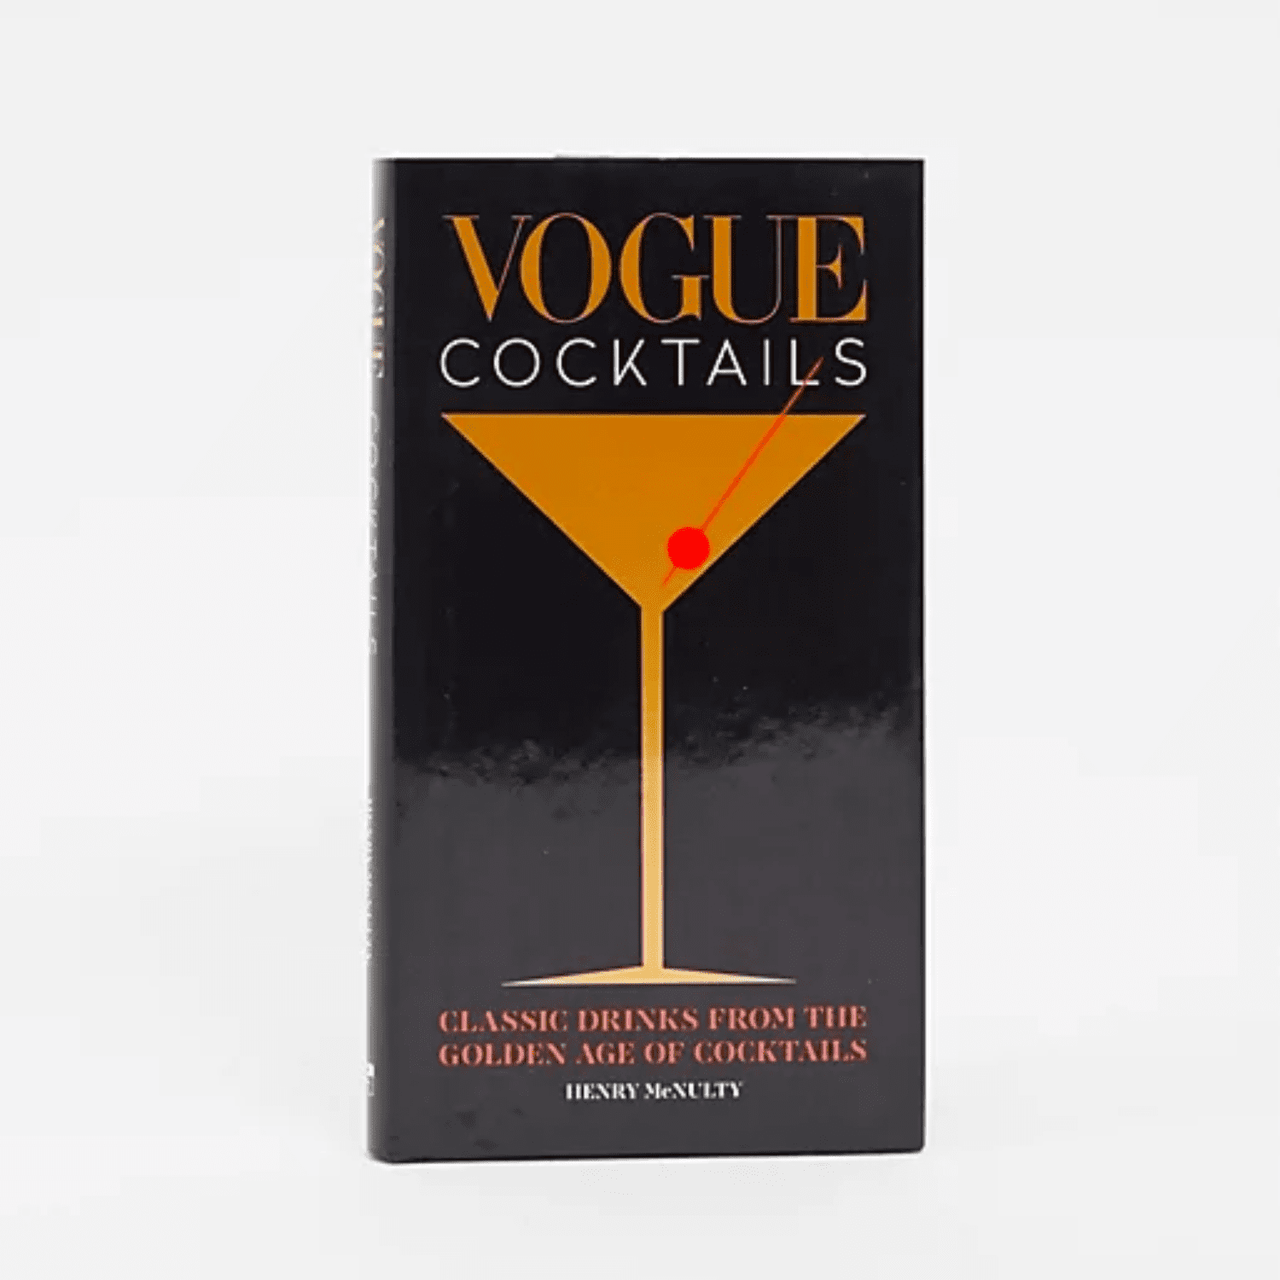 Drake General Store - Vogue Cocktails: Classic Drinks From the Golden Age of Cocktails HENRY MCNULTY